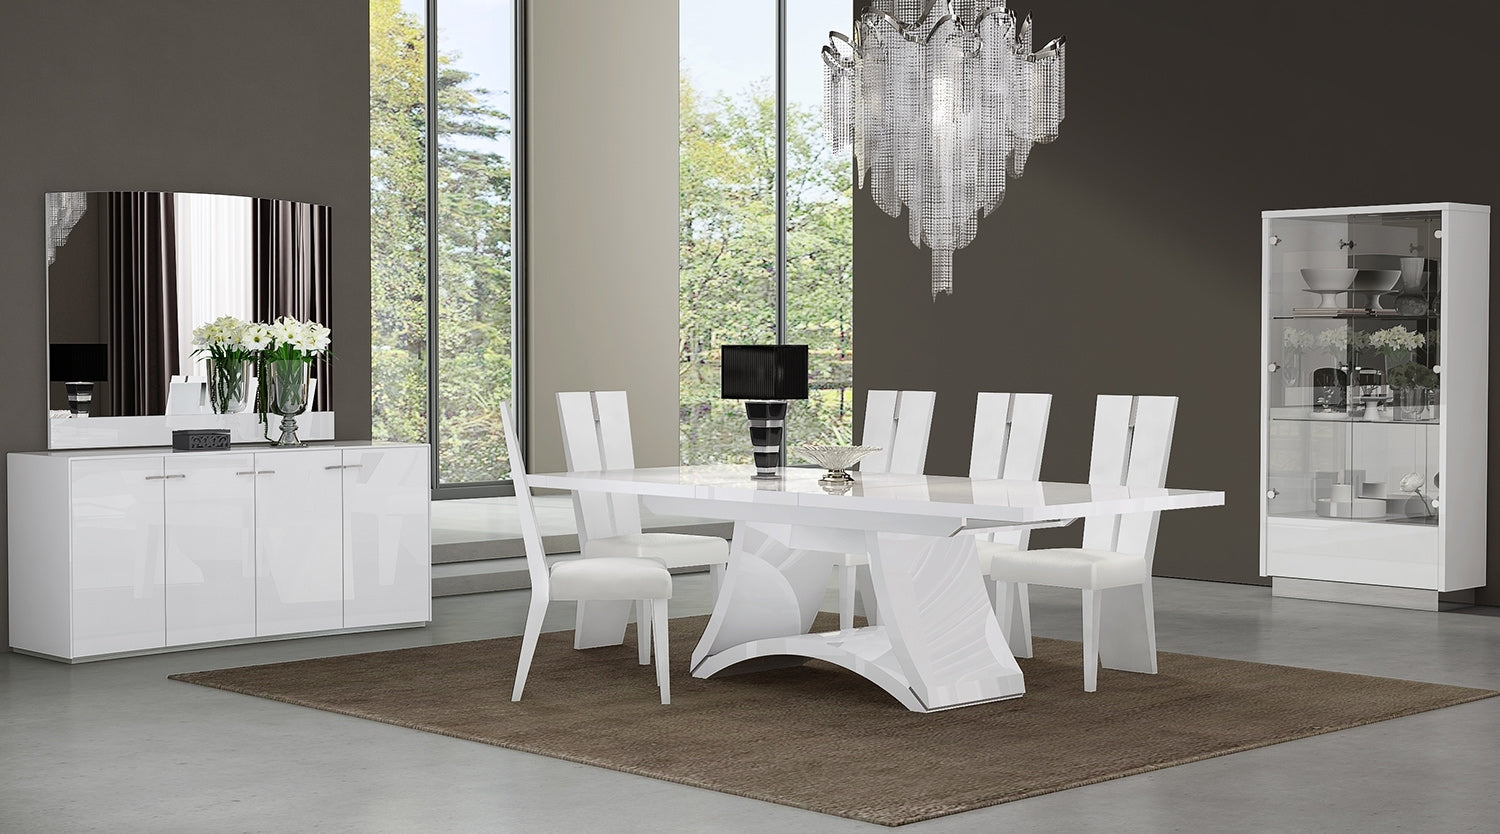 98.5" X 43.5" X 30" White  Dining Table And 6" Chair Set